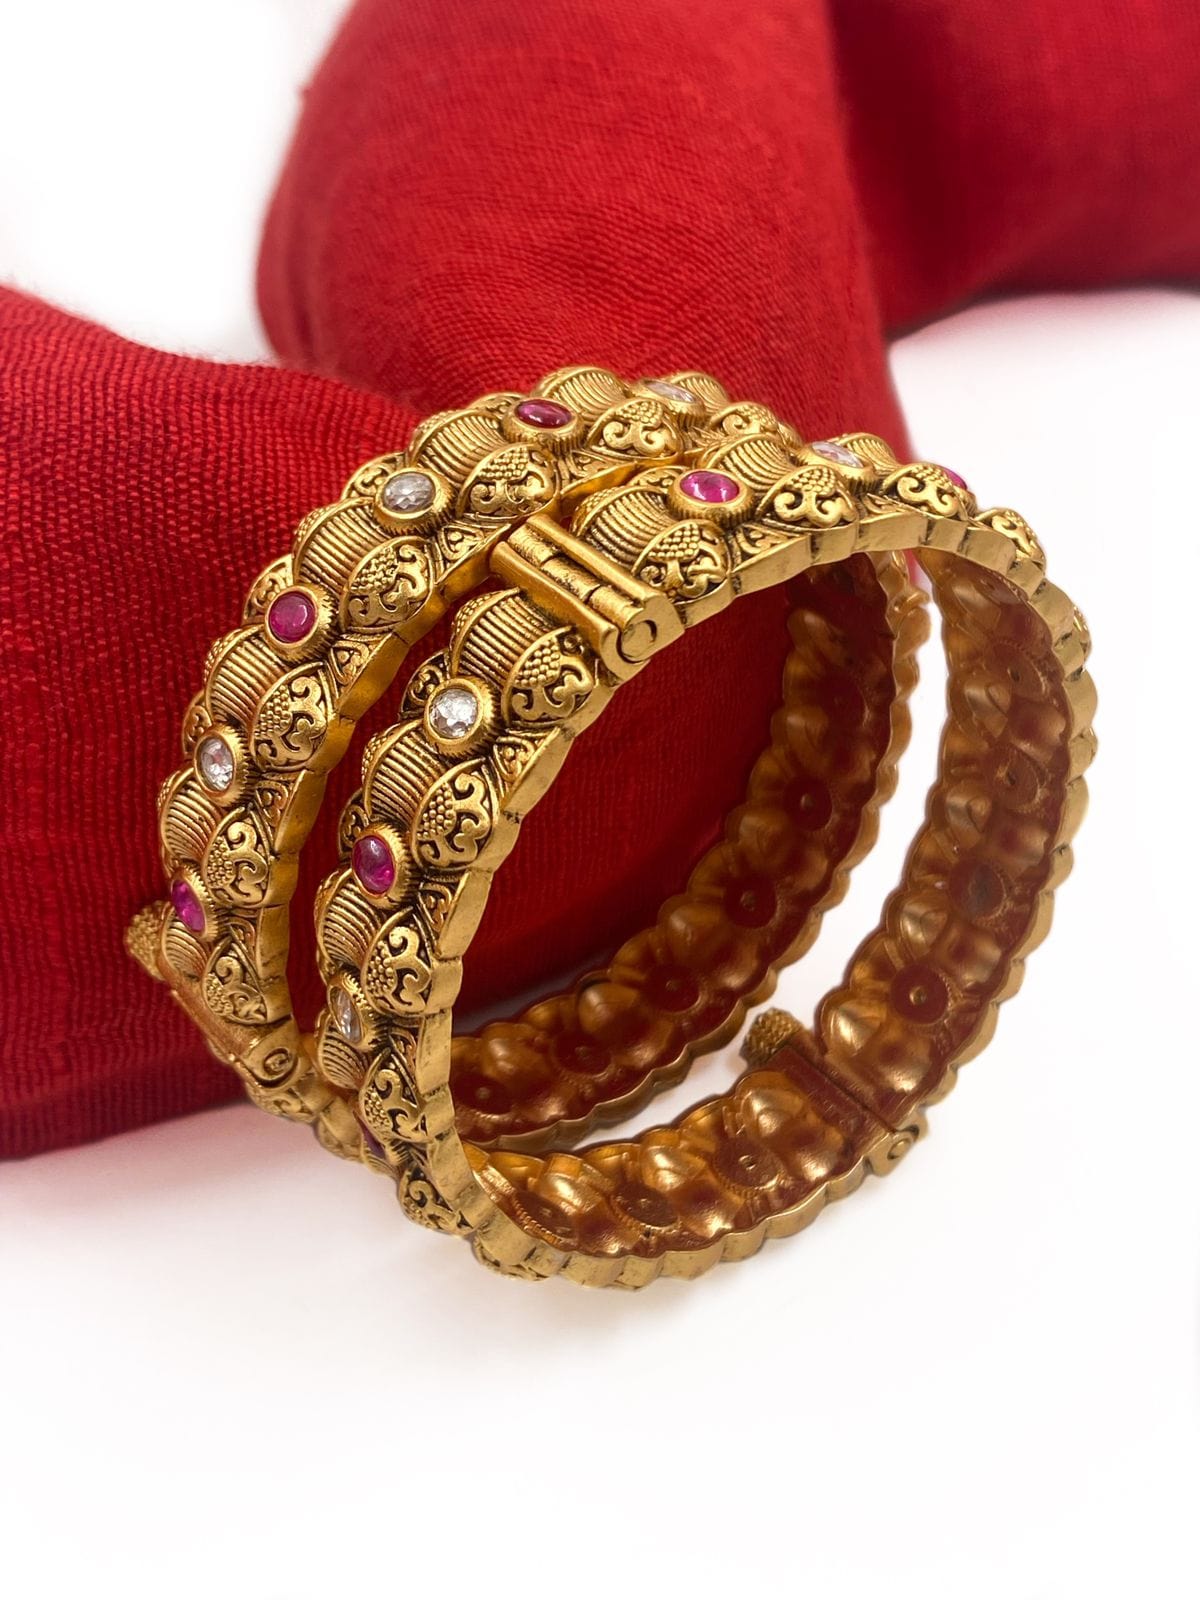 Gold Plated Artificial Openable Golden Bangles For Ladies By Gehna Shop Antique Golden Bangles